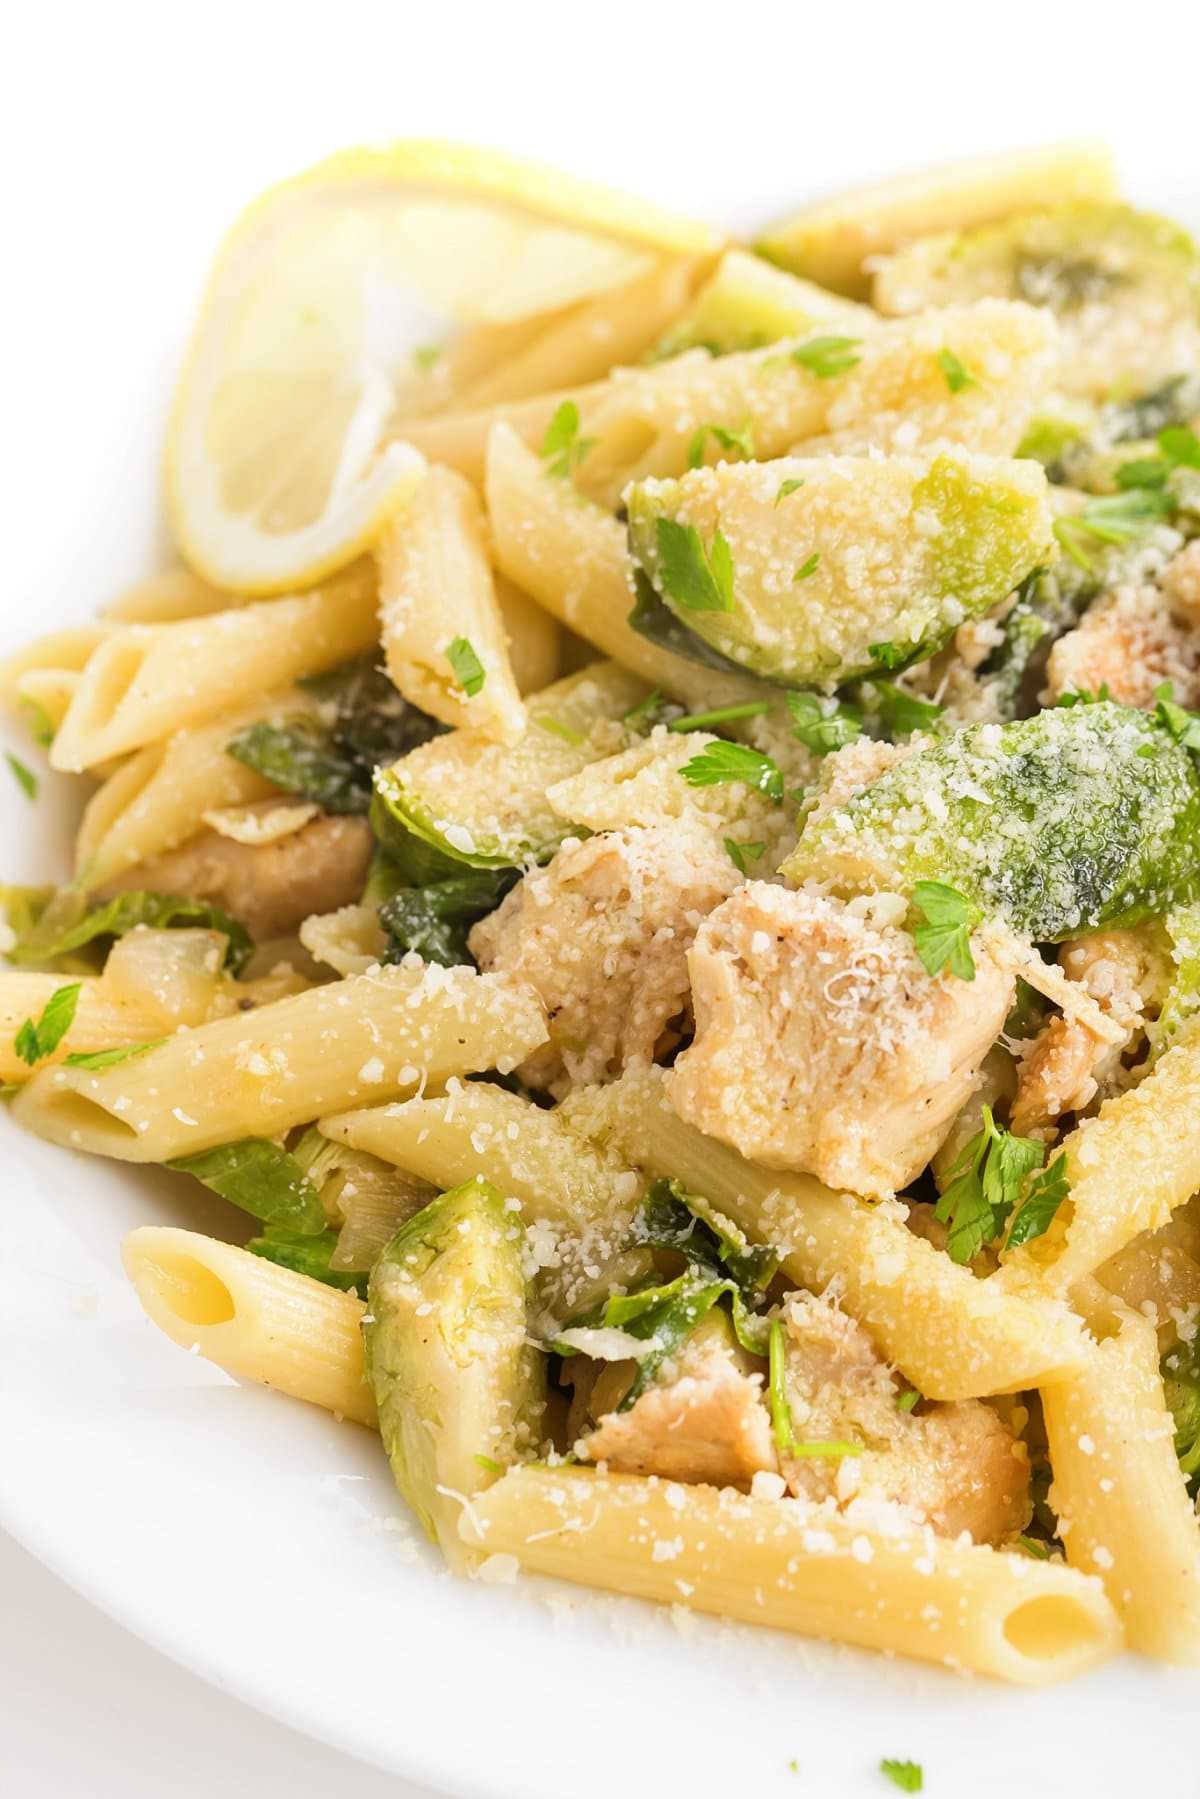 Chicken and Brussels sprouts with penne.